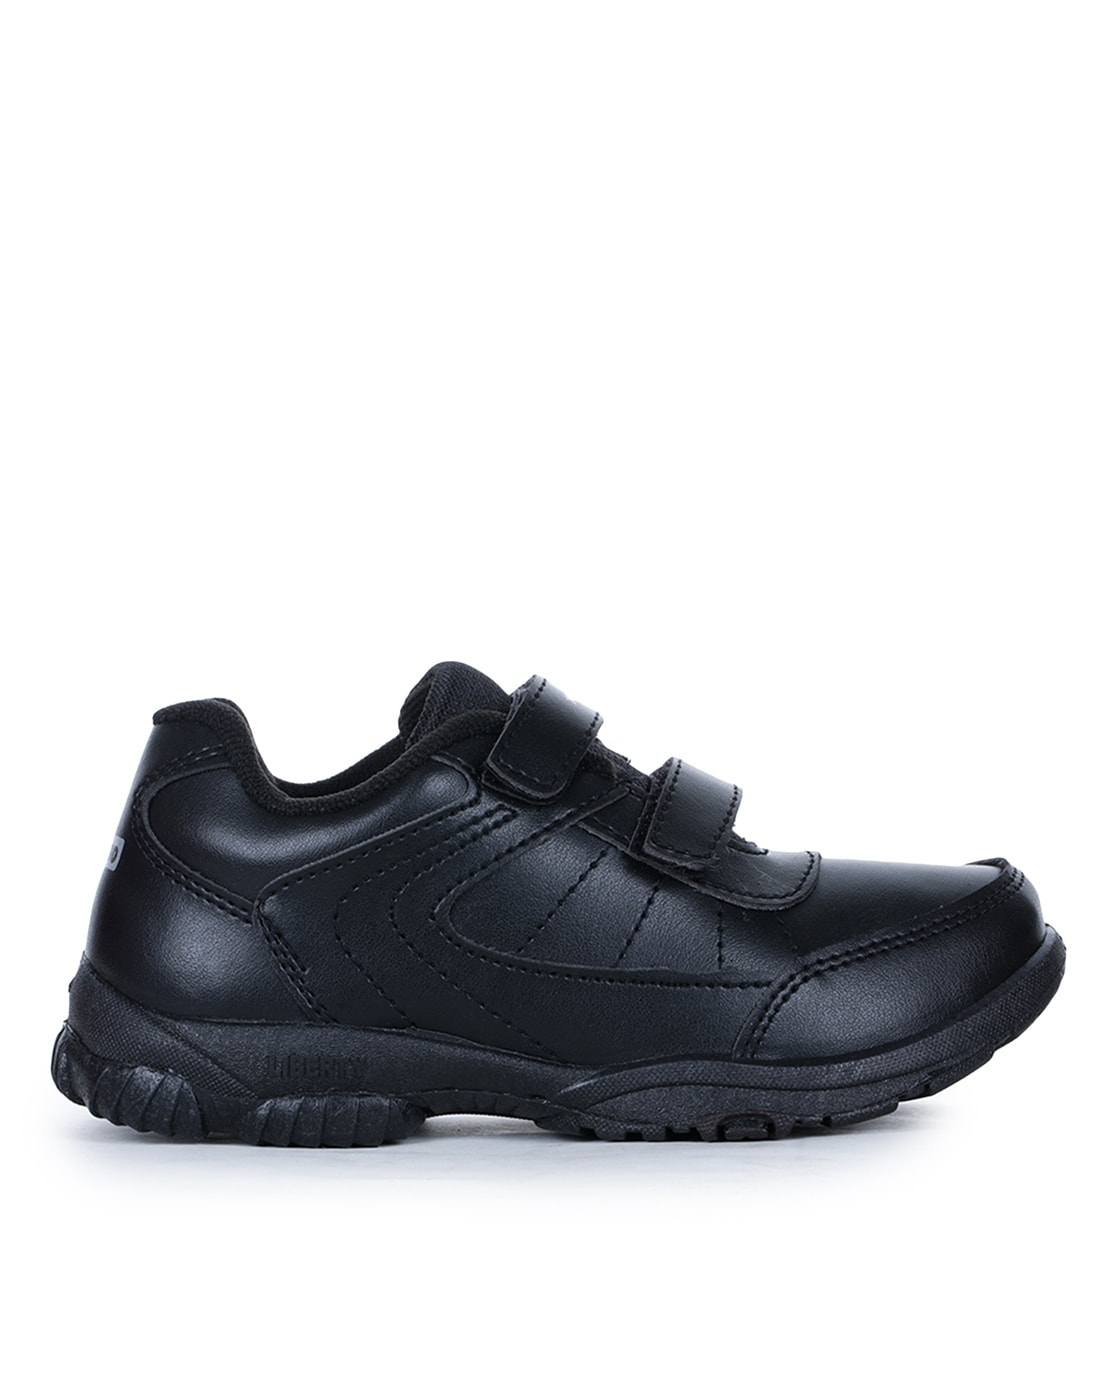 Buy Black Shoes for Boys by LIBERTY Online | Ajio.com